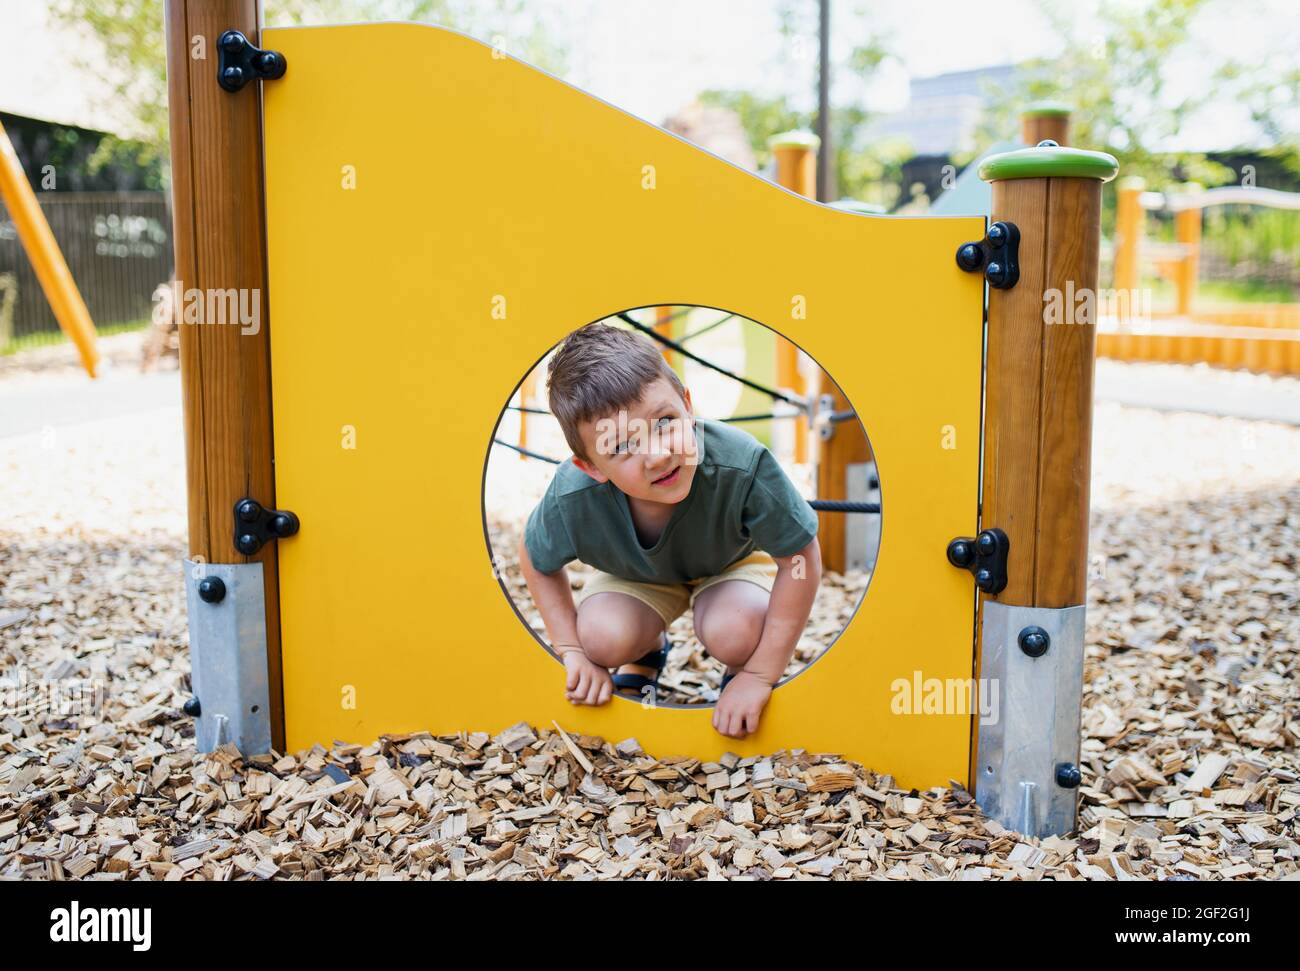 Small nursery school boy playing outdoors on playground, looking at camera. Stock Photo